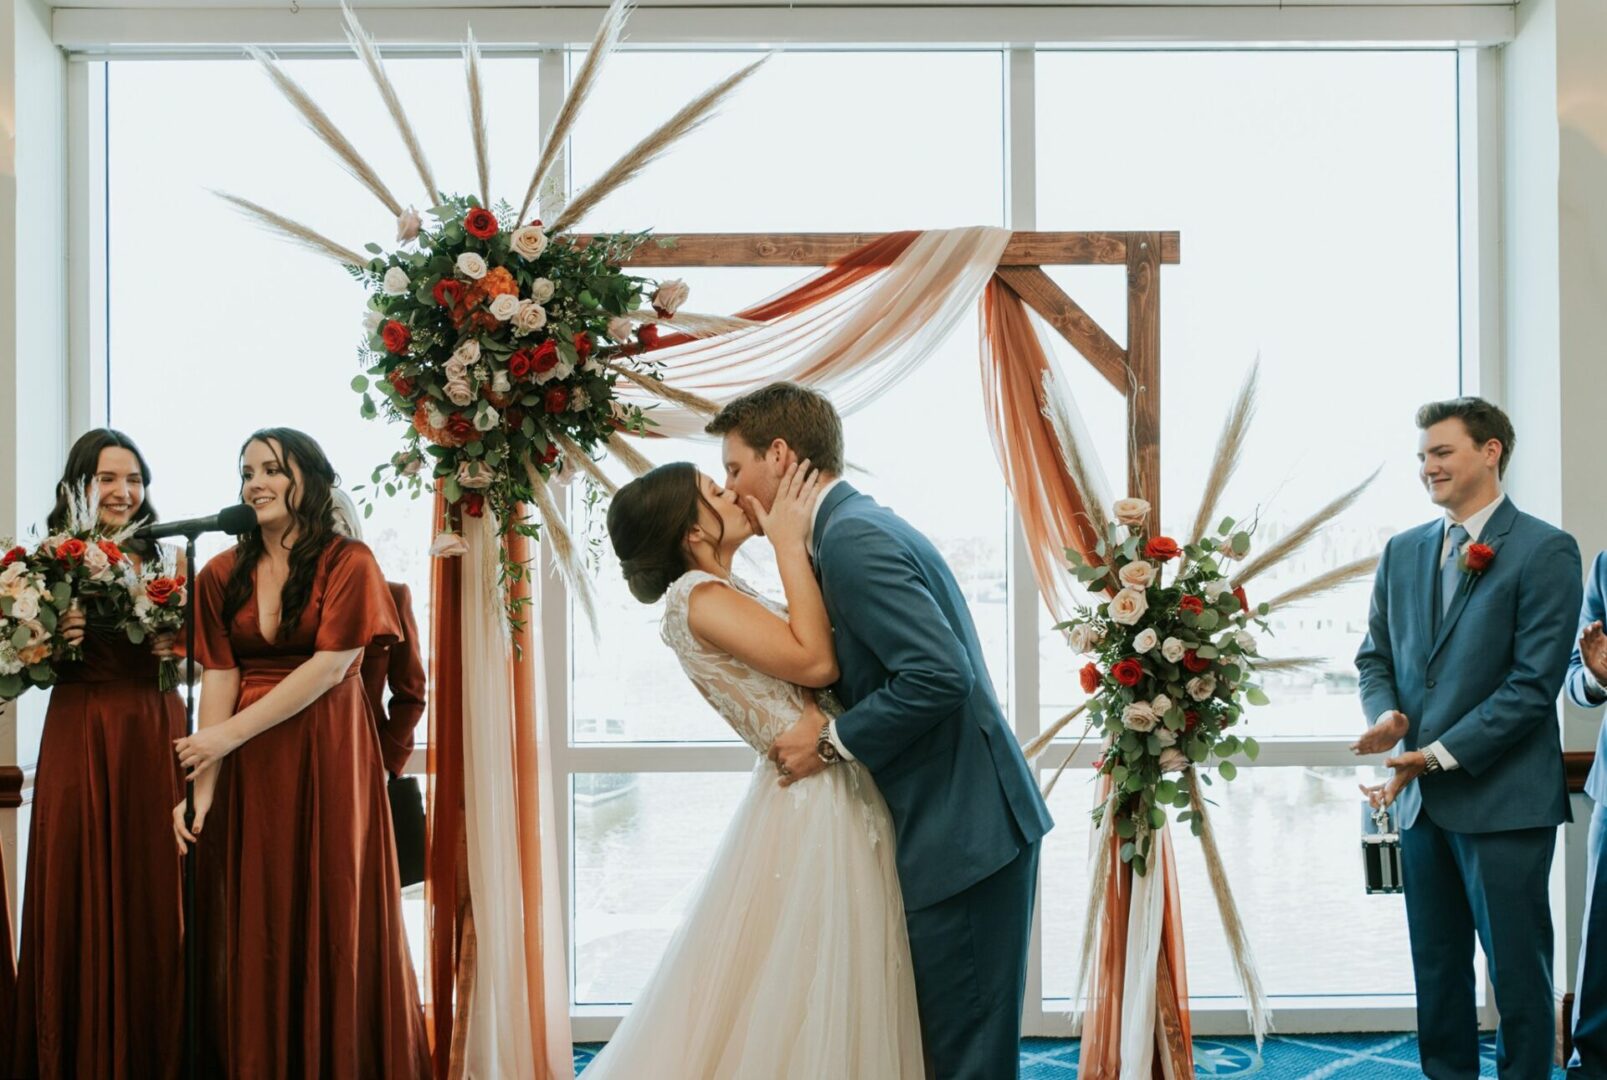 A Bride and Groom Kissing After the Wedding